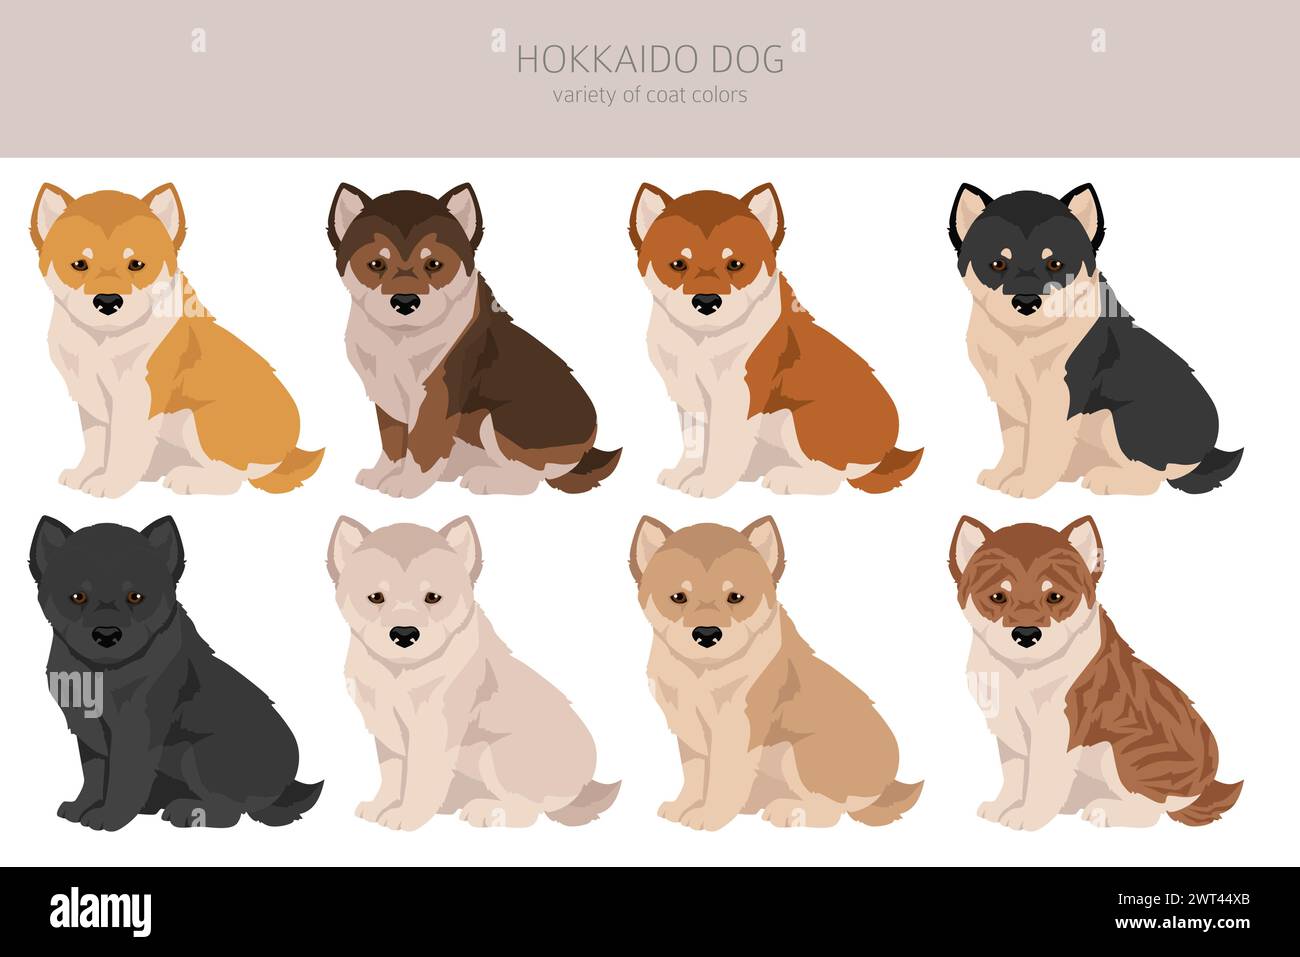 Hokkaido dog puppy , Ainu dog clipart. Different poses, coat colors set.  Vector illustration Stock Vector